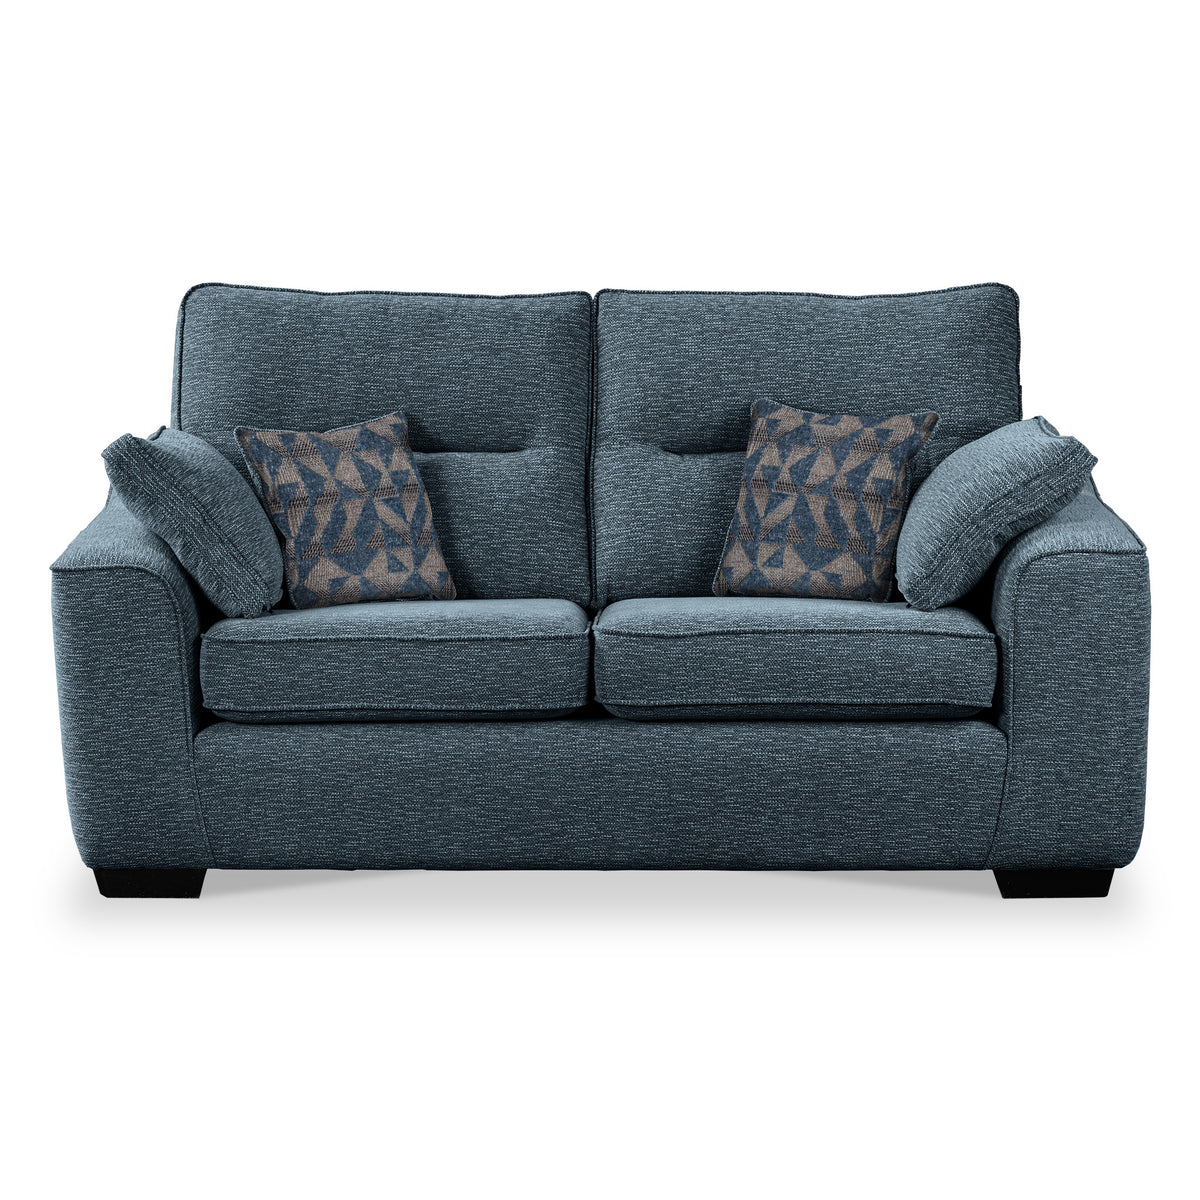 Sudbury Aegean 2 Seater Sofabed with Aegean Scatter Cushions from Roseland Furniture